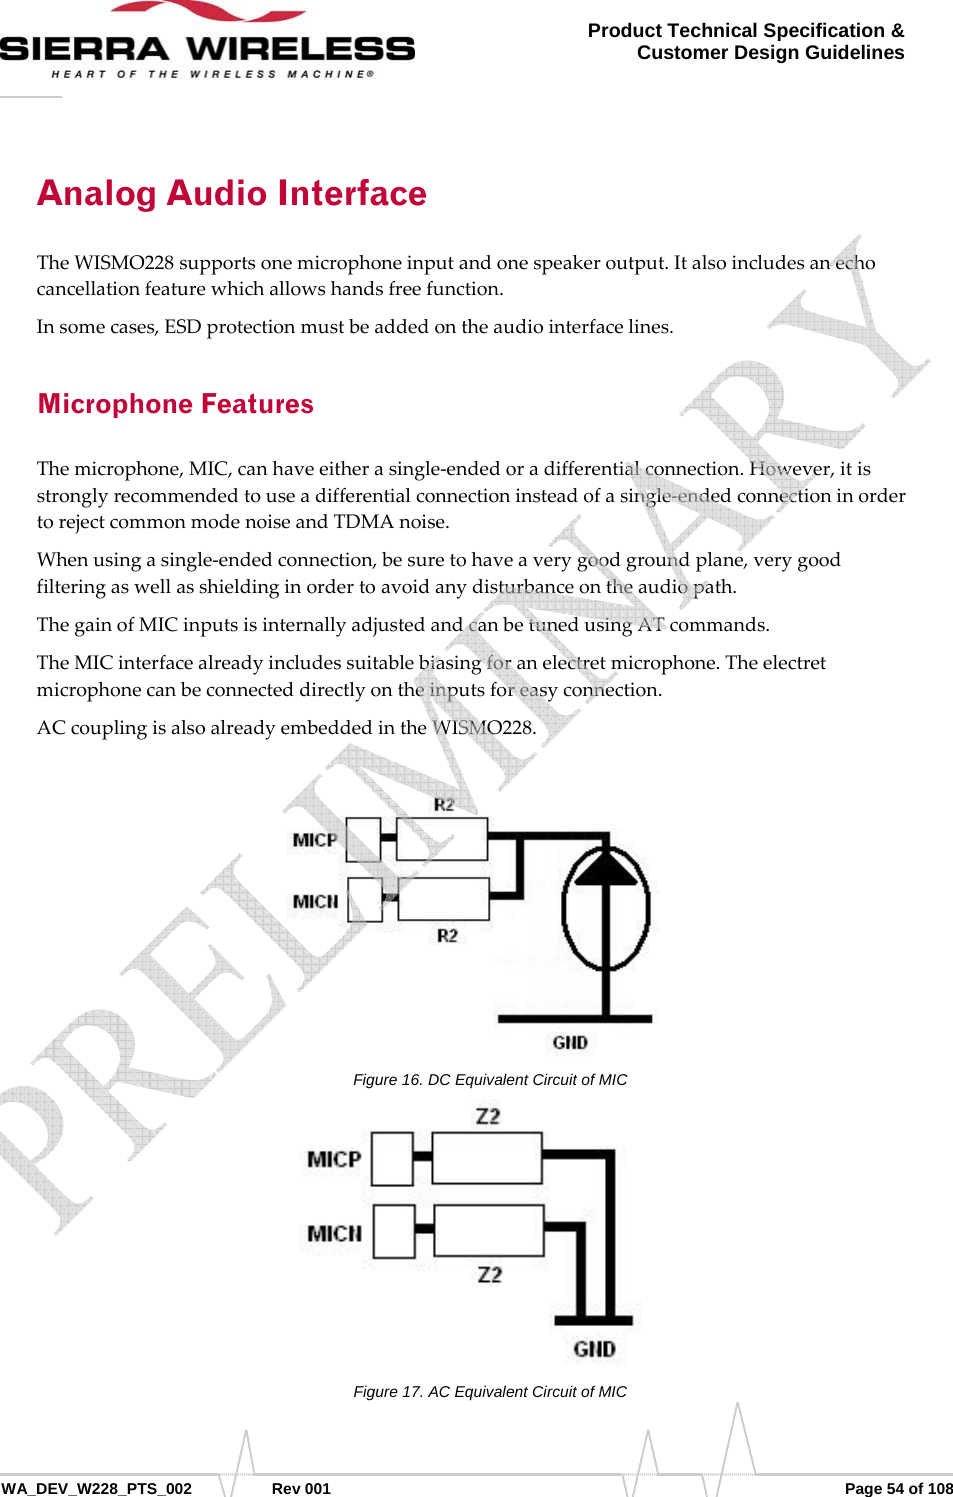      WA_DEV_W228_PTS_002 Rev 001  Page 54 of 108 Product Technical Specification &amp; Customer Design Guidelines Analog Audio Interface TheWISMO228supportsonemicrophoneinputandonespeakeroutput.Italsoincludesanechocancellationfeaturewhichallowshandsfreefunction.Insomecases,ESDprotectionmustbeaddedontheaudiointerfacelines.Microphone Features Themicrophone,MIC,canhaveeitherasingle‐endedoradifferentialconnection.However,itisstronglyrecommendedtouseadifferentialconnectioninsteadofasingle‐endedconnectioninordertorejectcommonmodenoiseandTDMAnoise.Whenusingasingle‐endedconnection,besuretohaveaverygoodgroundplane,verygoodfilteringaswellasshieldinginordertoavoidanydisturbanceontheaudiopath.ThegainofMICinputsisinternallyadjustedandcanbetunedusingATcommands.TheMICinterfacealreadyincludessuitablebiasingforanelectretmicrophone.Theelectretmicrophonecanbeconnecteddirectlyontheinputsforeasyconnection.ACcouplingisalsoalreadyembeddedintheWISMO228.Figure 16. DC Equivalent Circuit of MIC Figure 17. AC Equivalent Circuit of MIC    